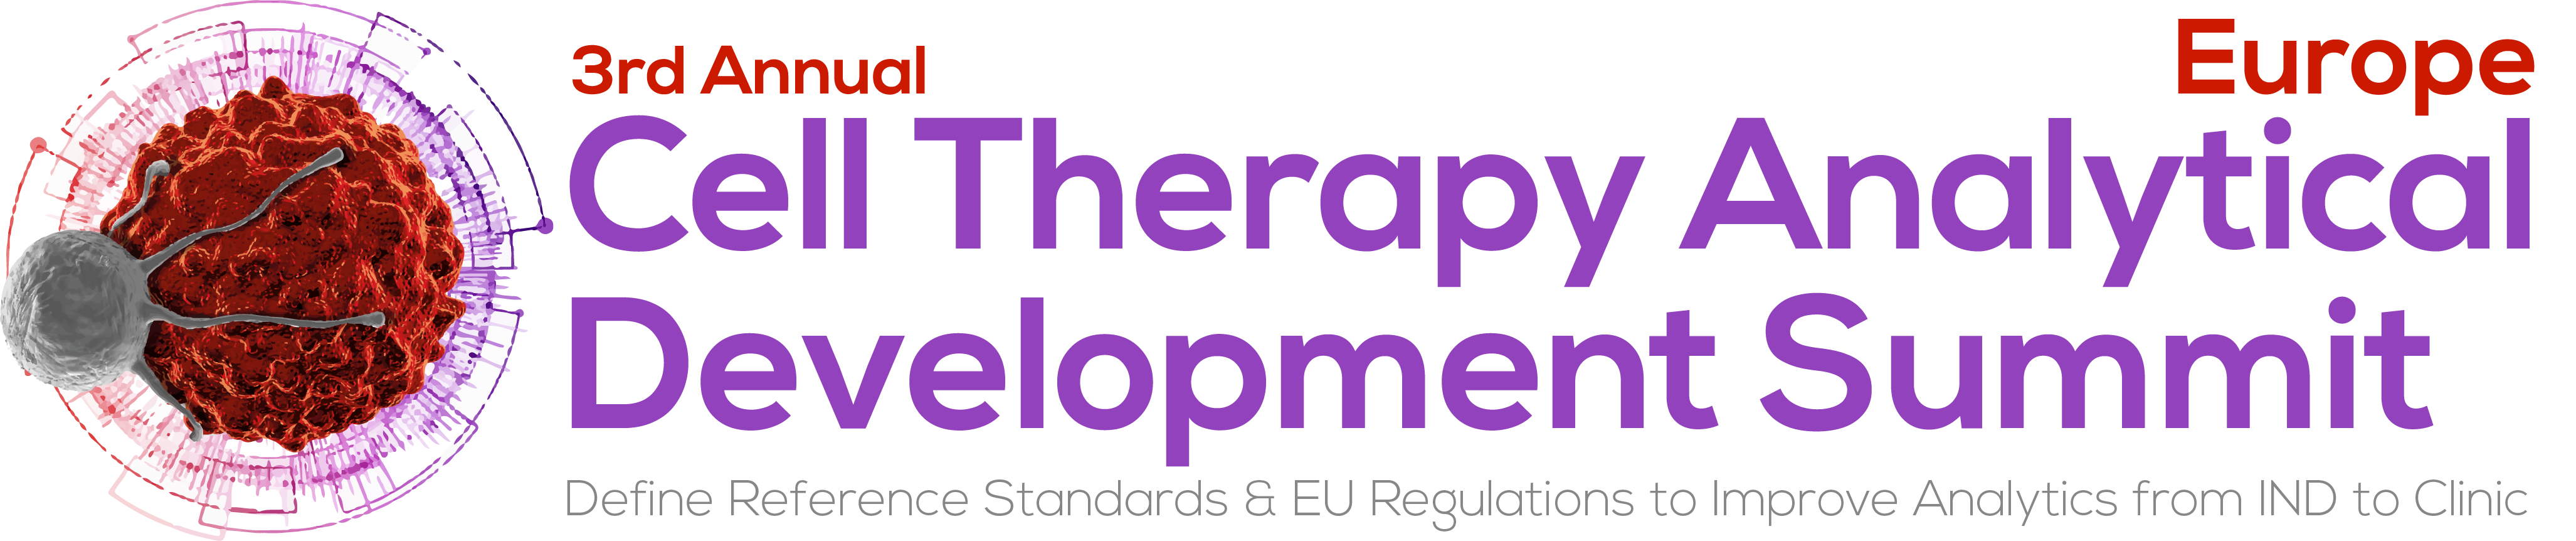 3rd Annual Celll Therapy Analytical Development Summit Europe